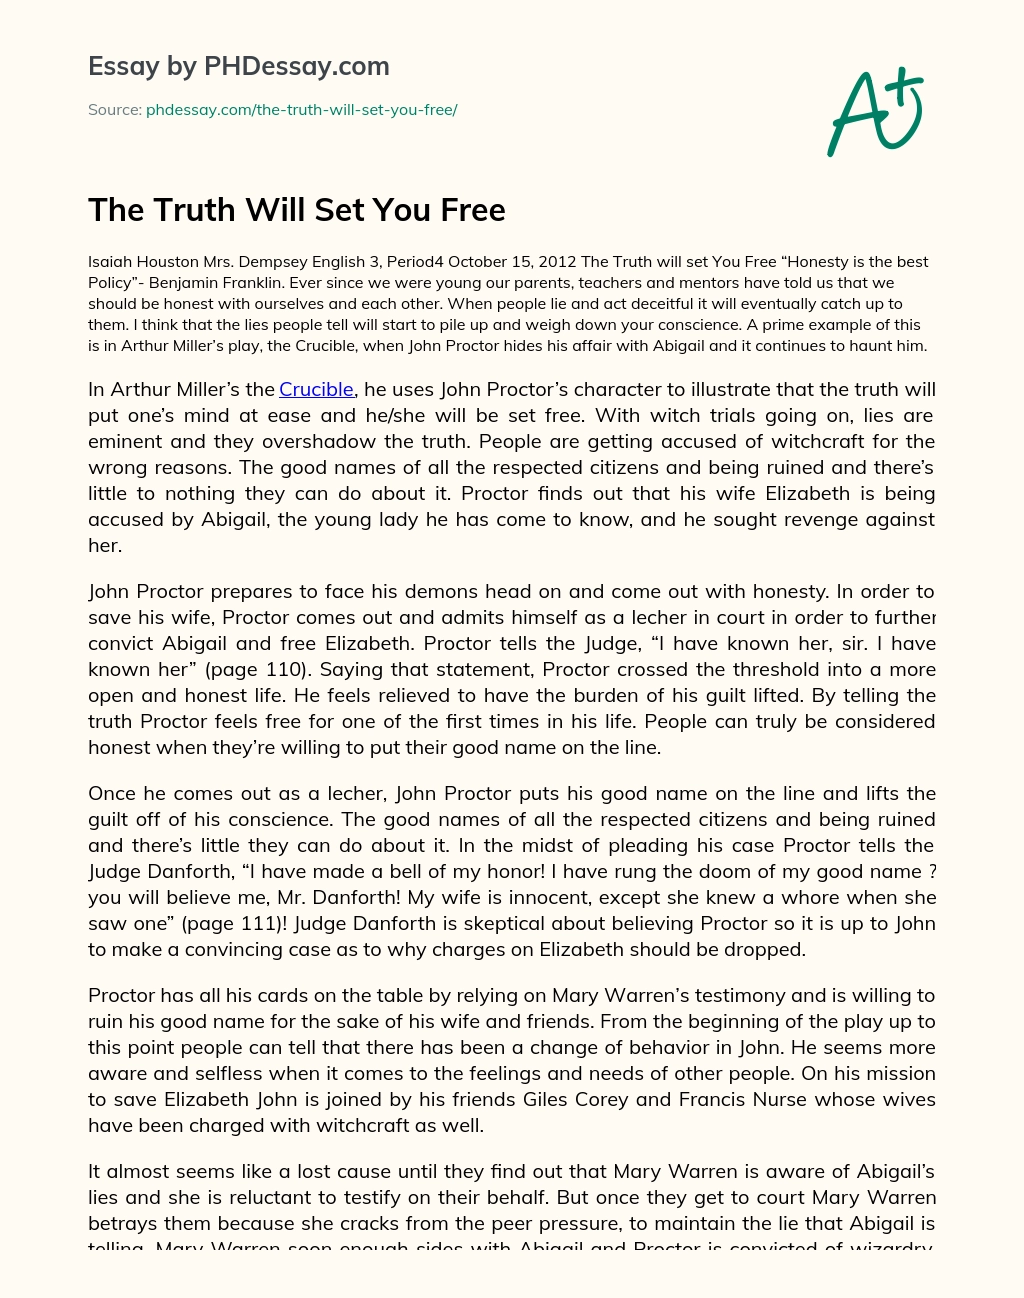 essay about the truth set me free